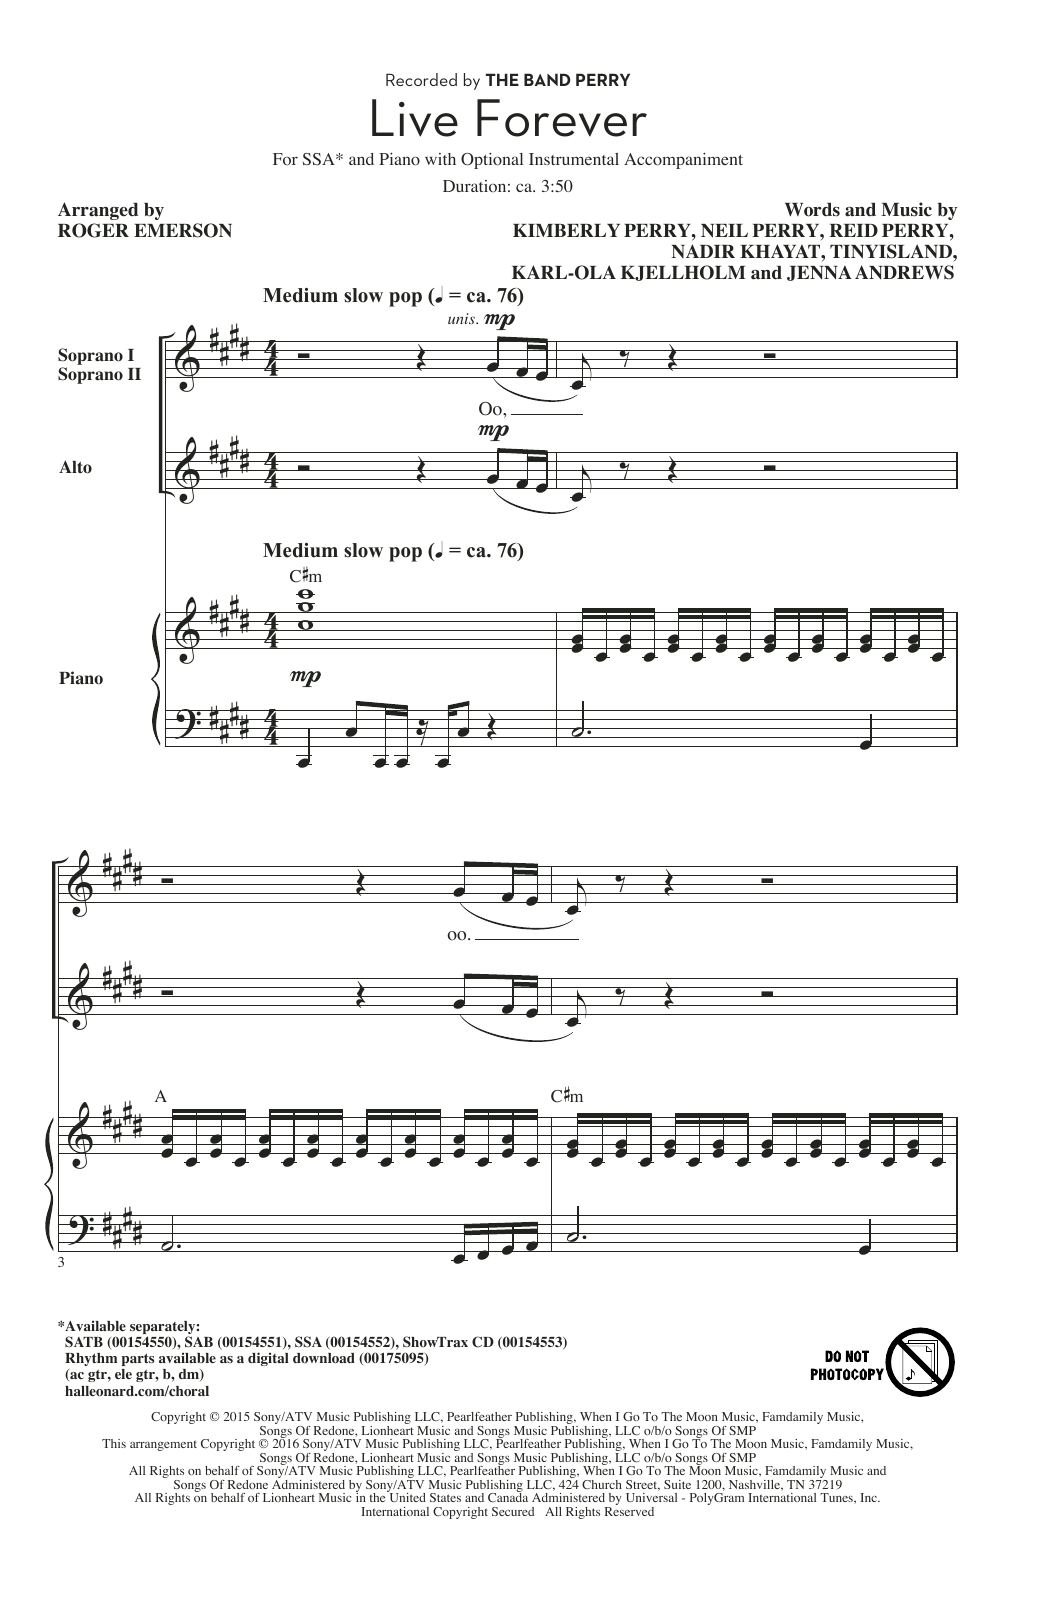 Download The Band Perry Live Forever (arr. Roger Emerson) Sheet Music